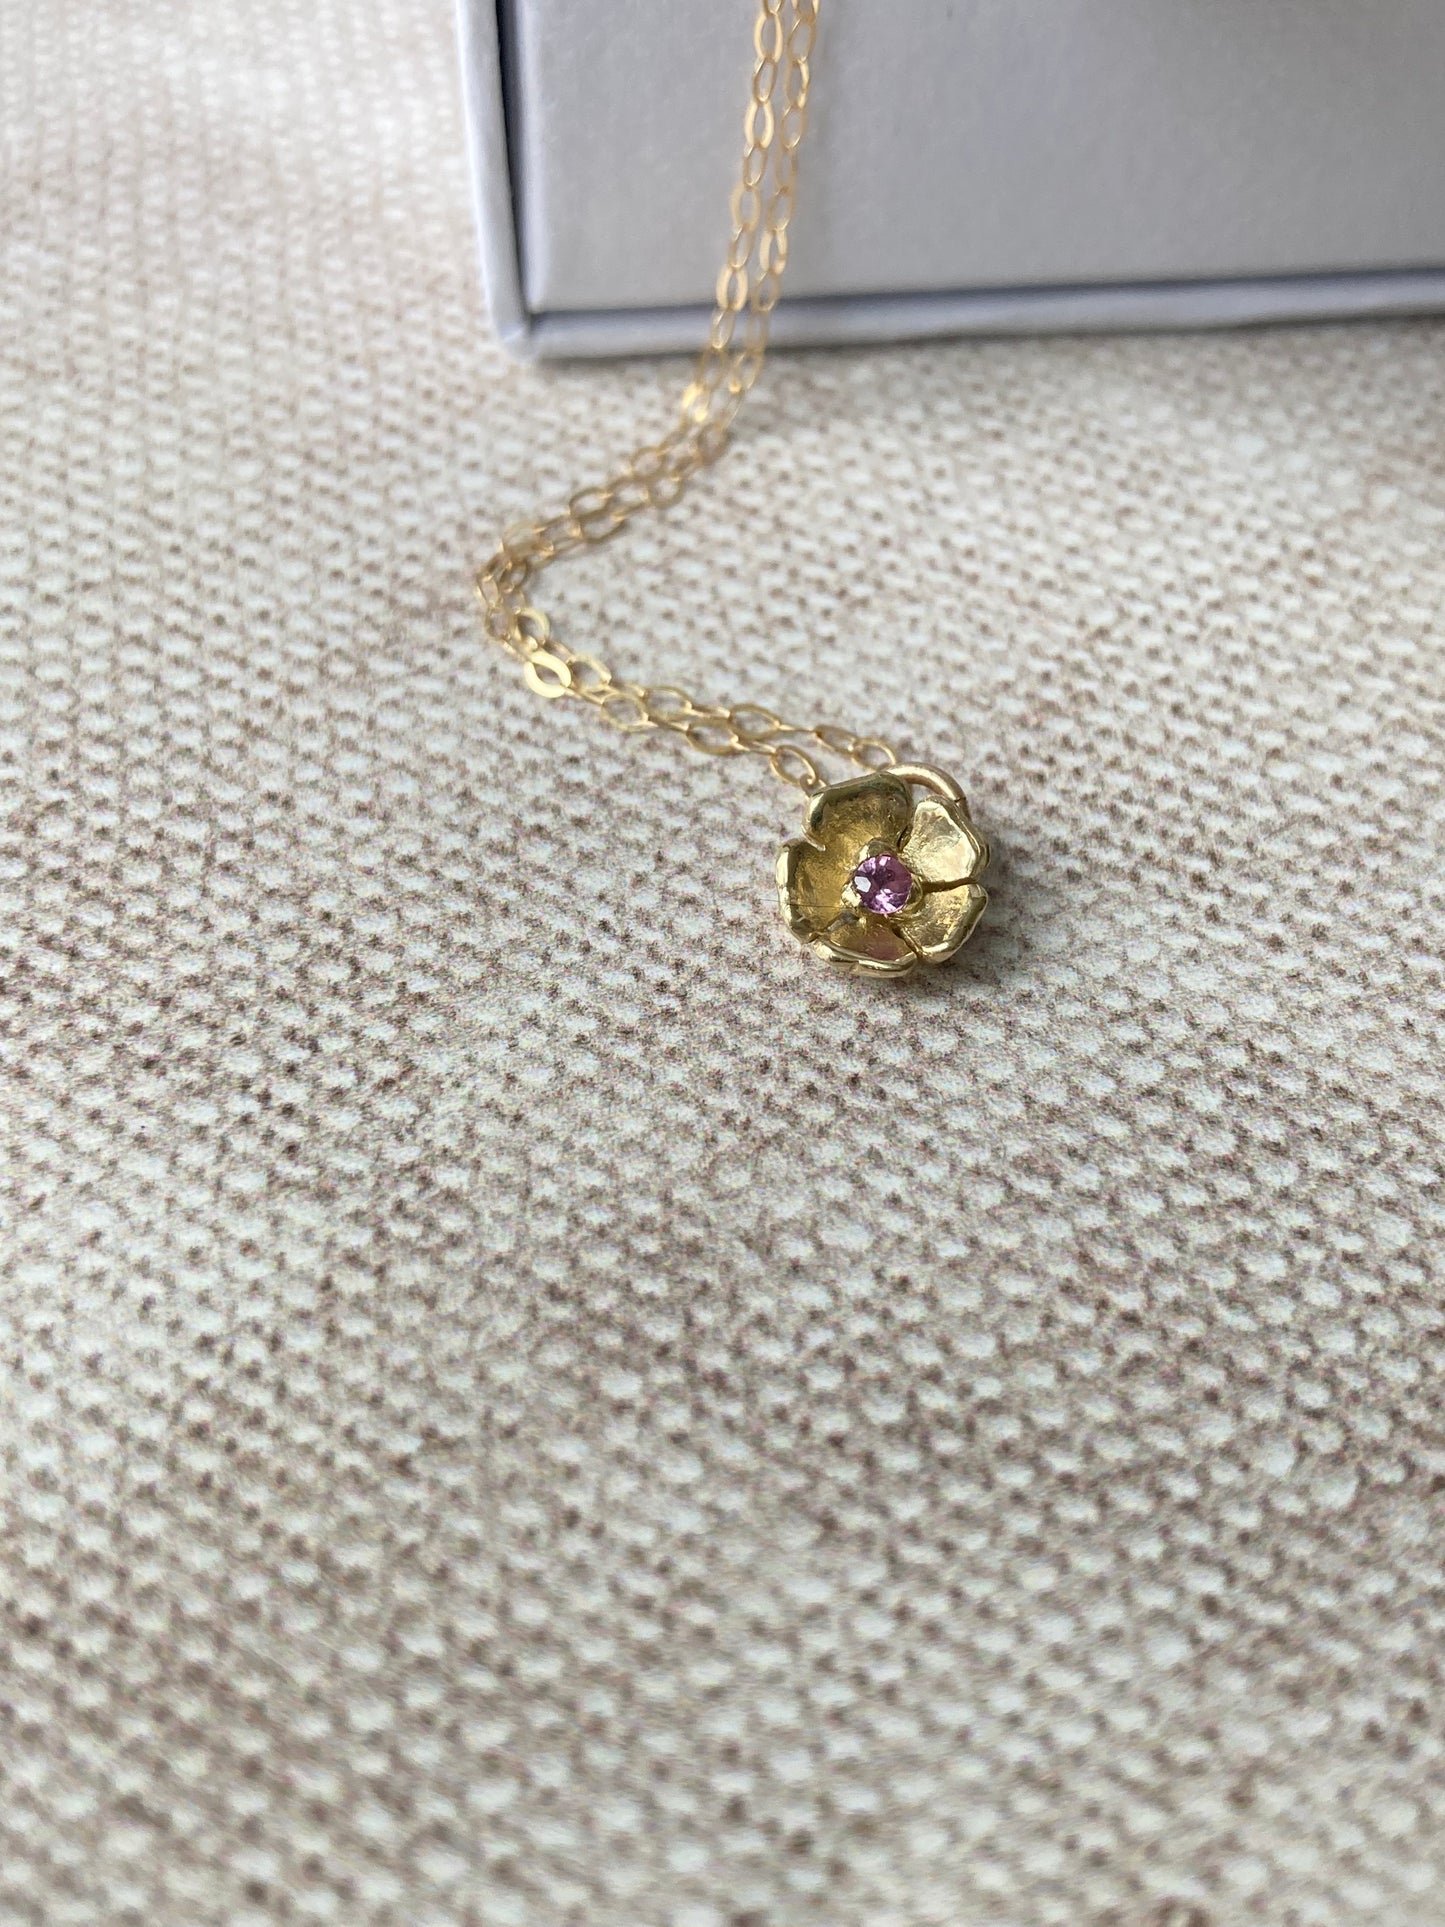 9ct gold flower pendant with sapphires